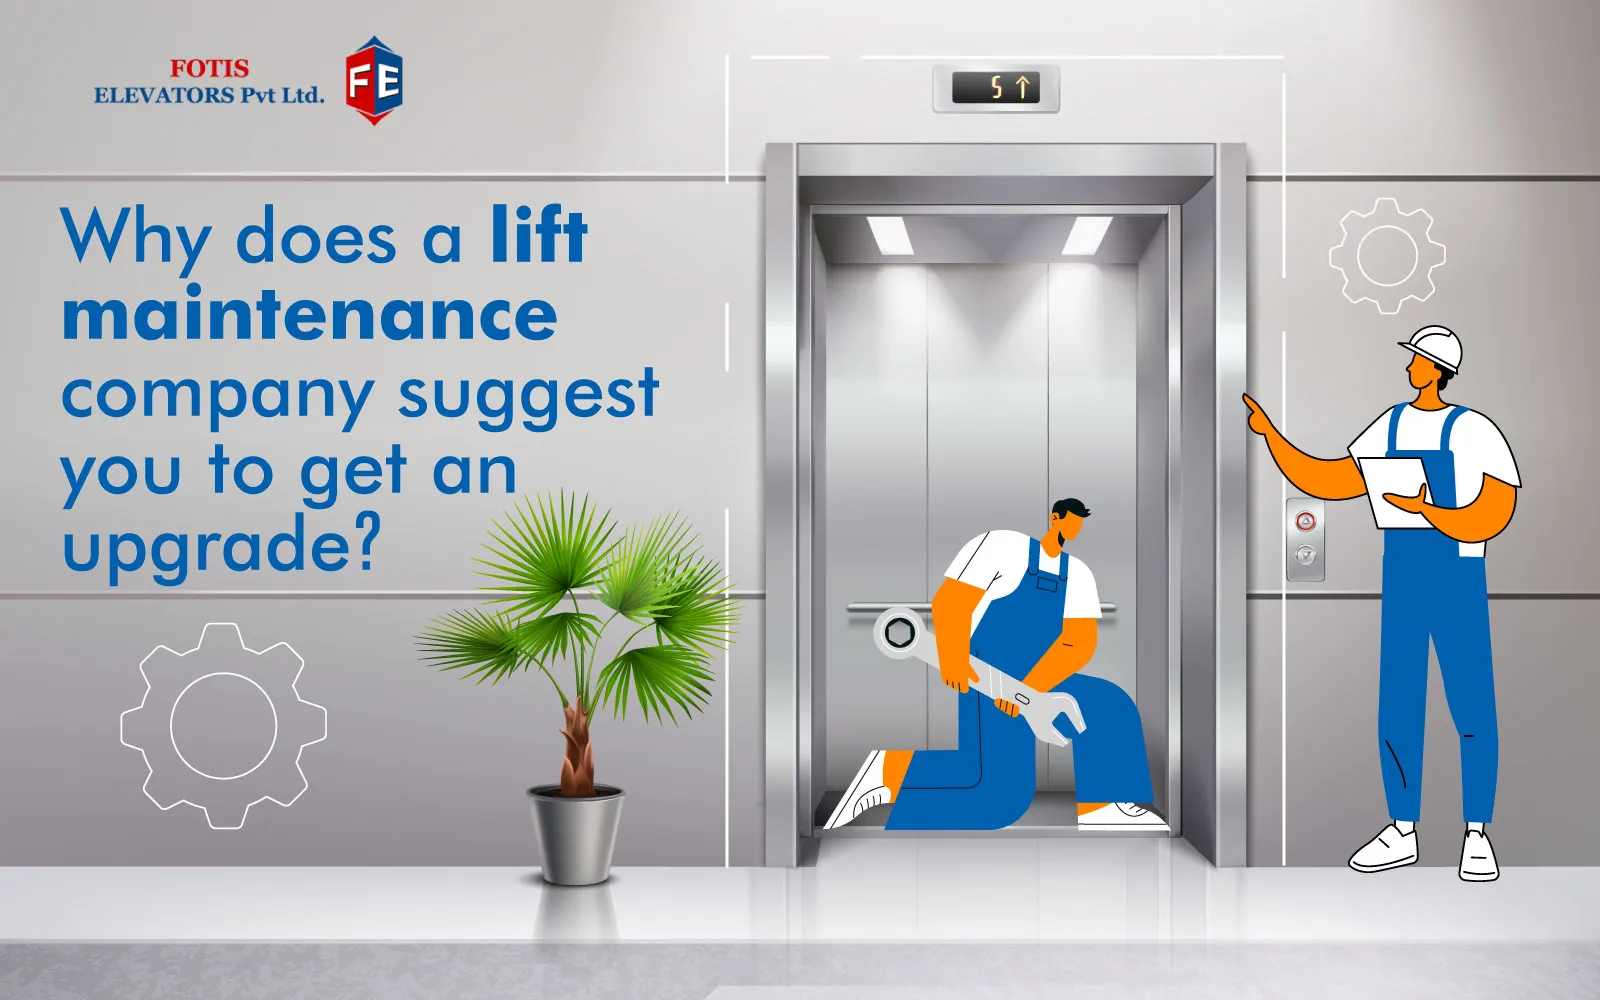 Why does a lift maintenance company suggest you to get an upgrade?